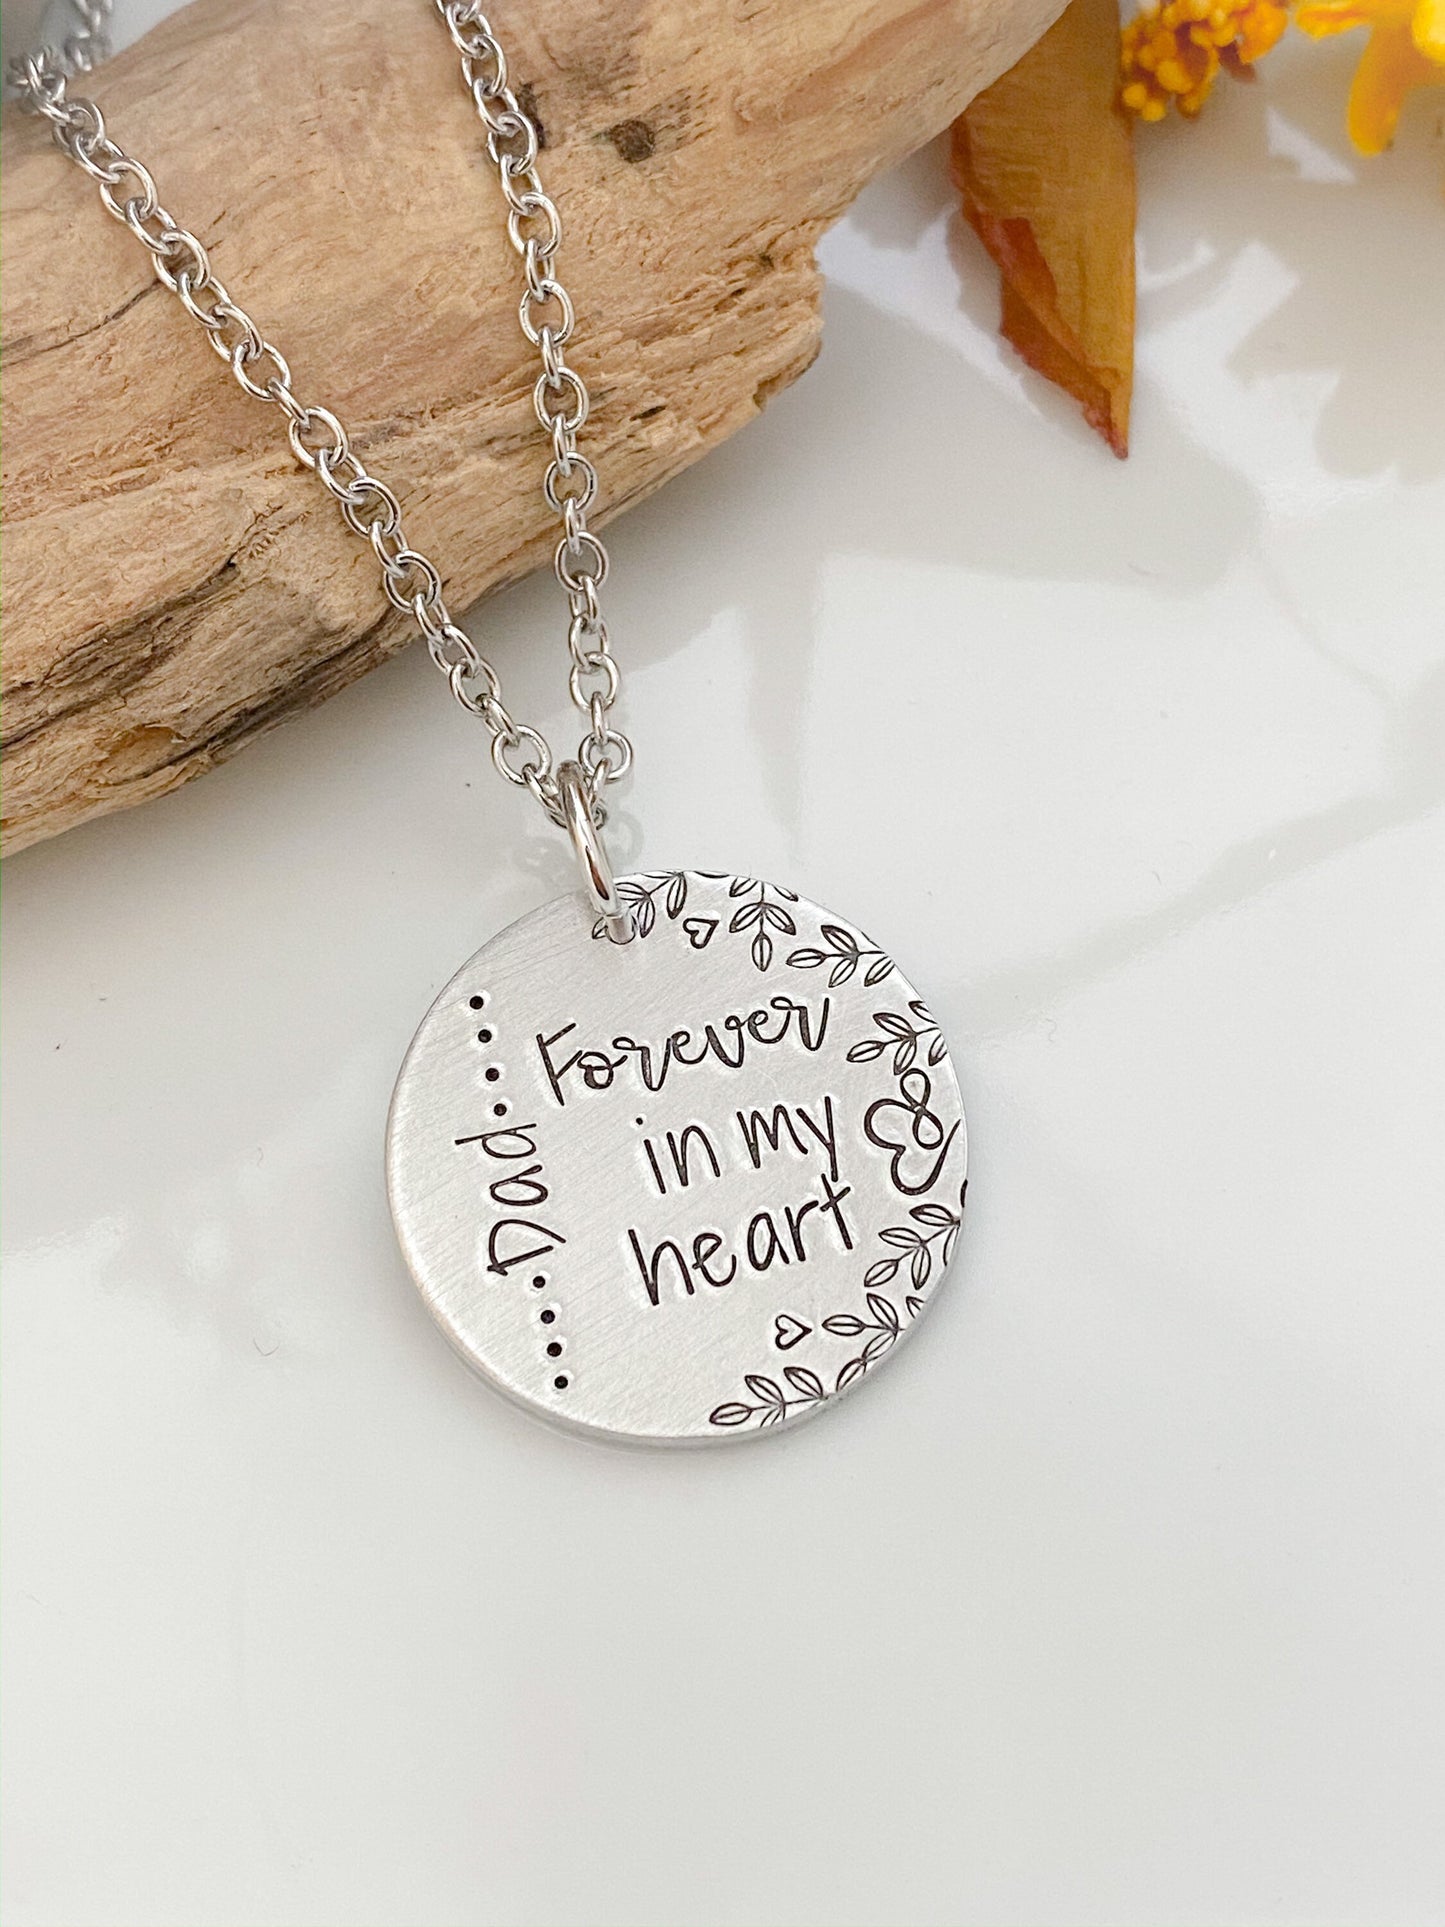 Dad necklace--memorial necklace--remembrance necklace--father memorial jewelry--memorial gift--sympathy gift--loss gift--father memorial